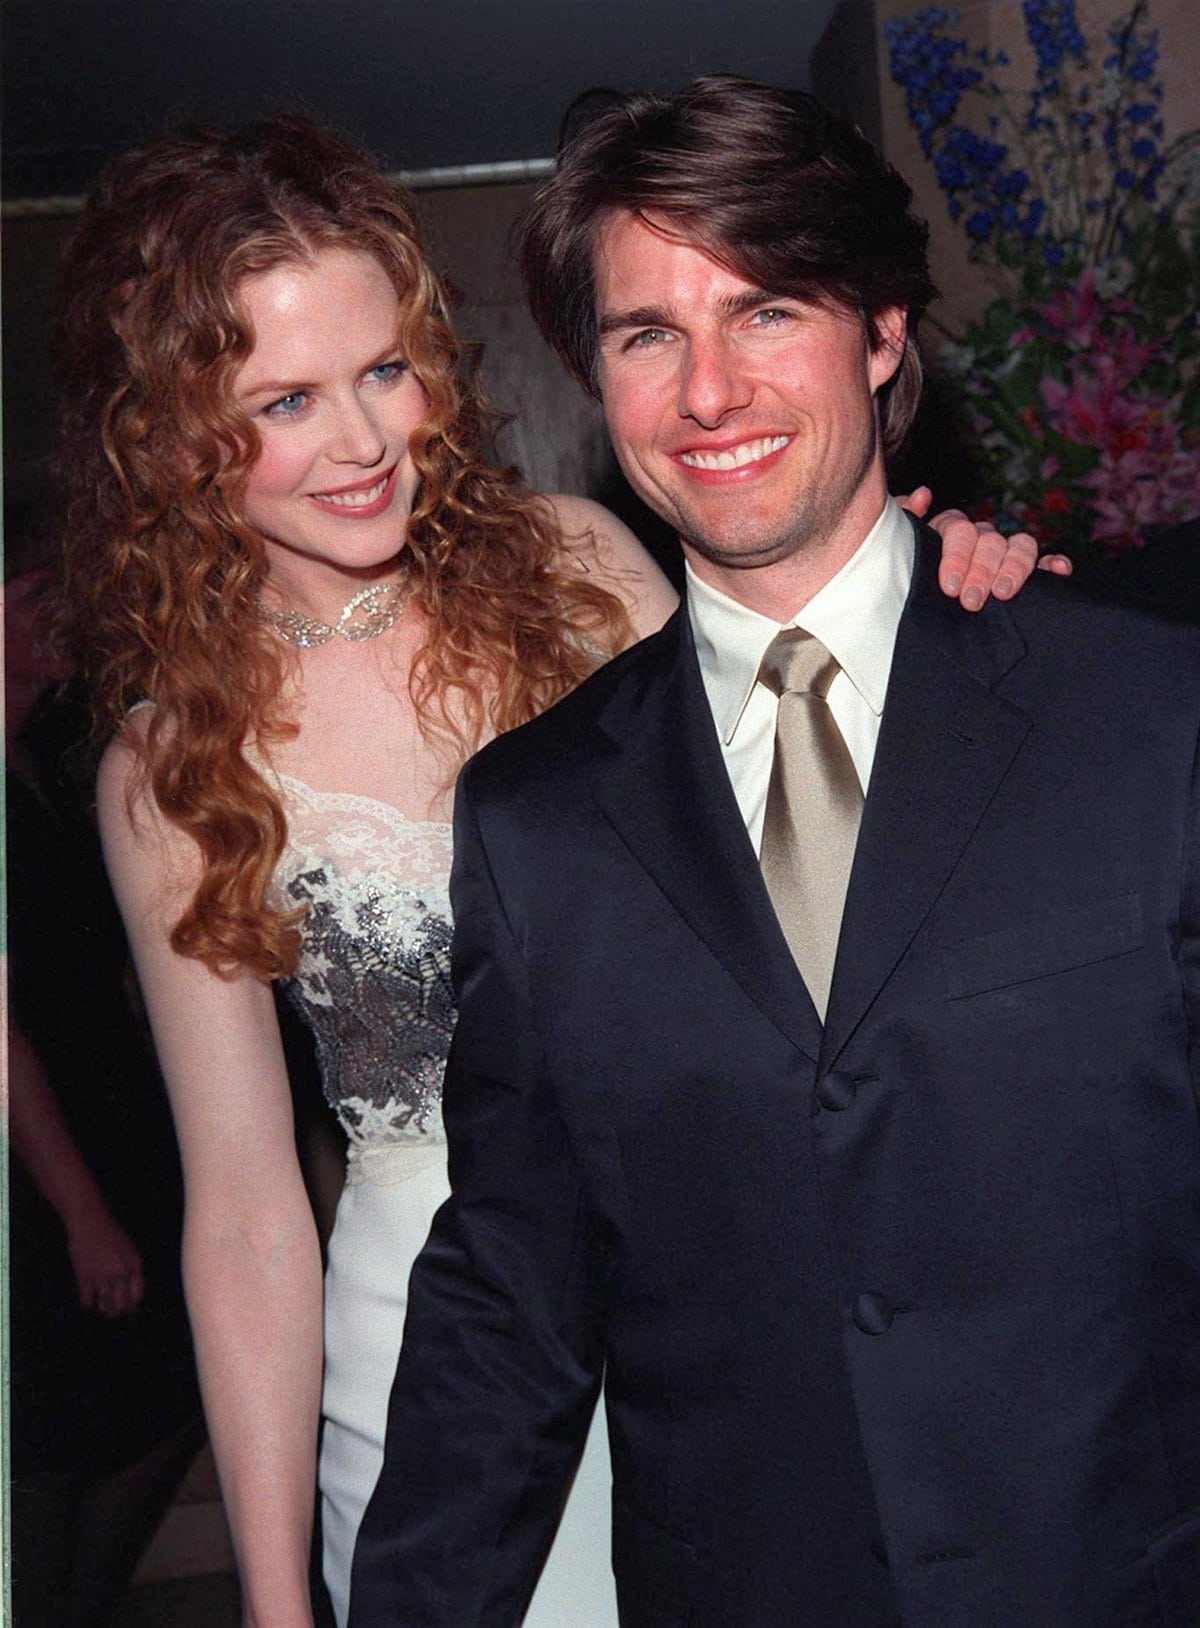 Nicole Kidman and Tom Cruise married in 1990 and split in 2001